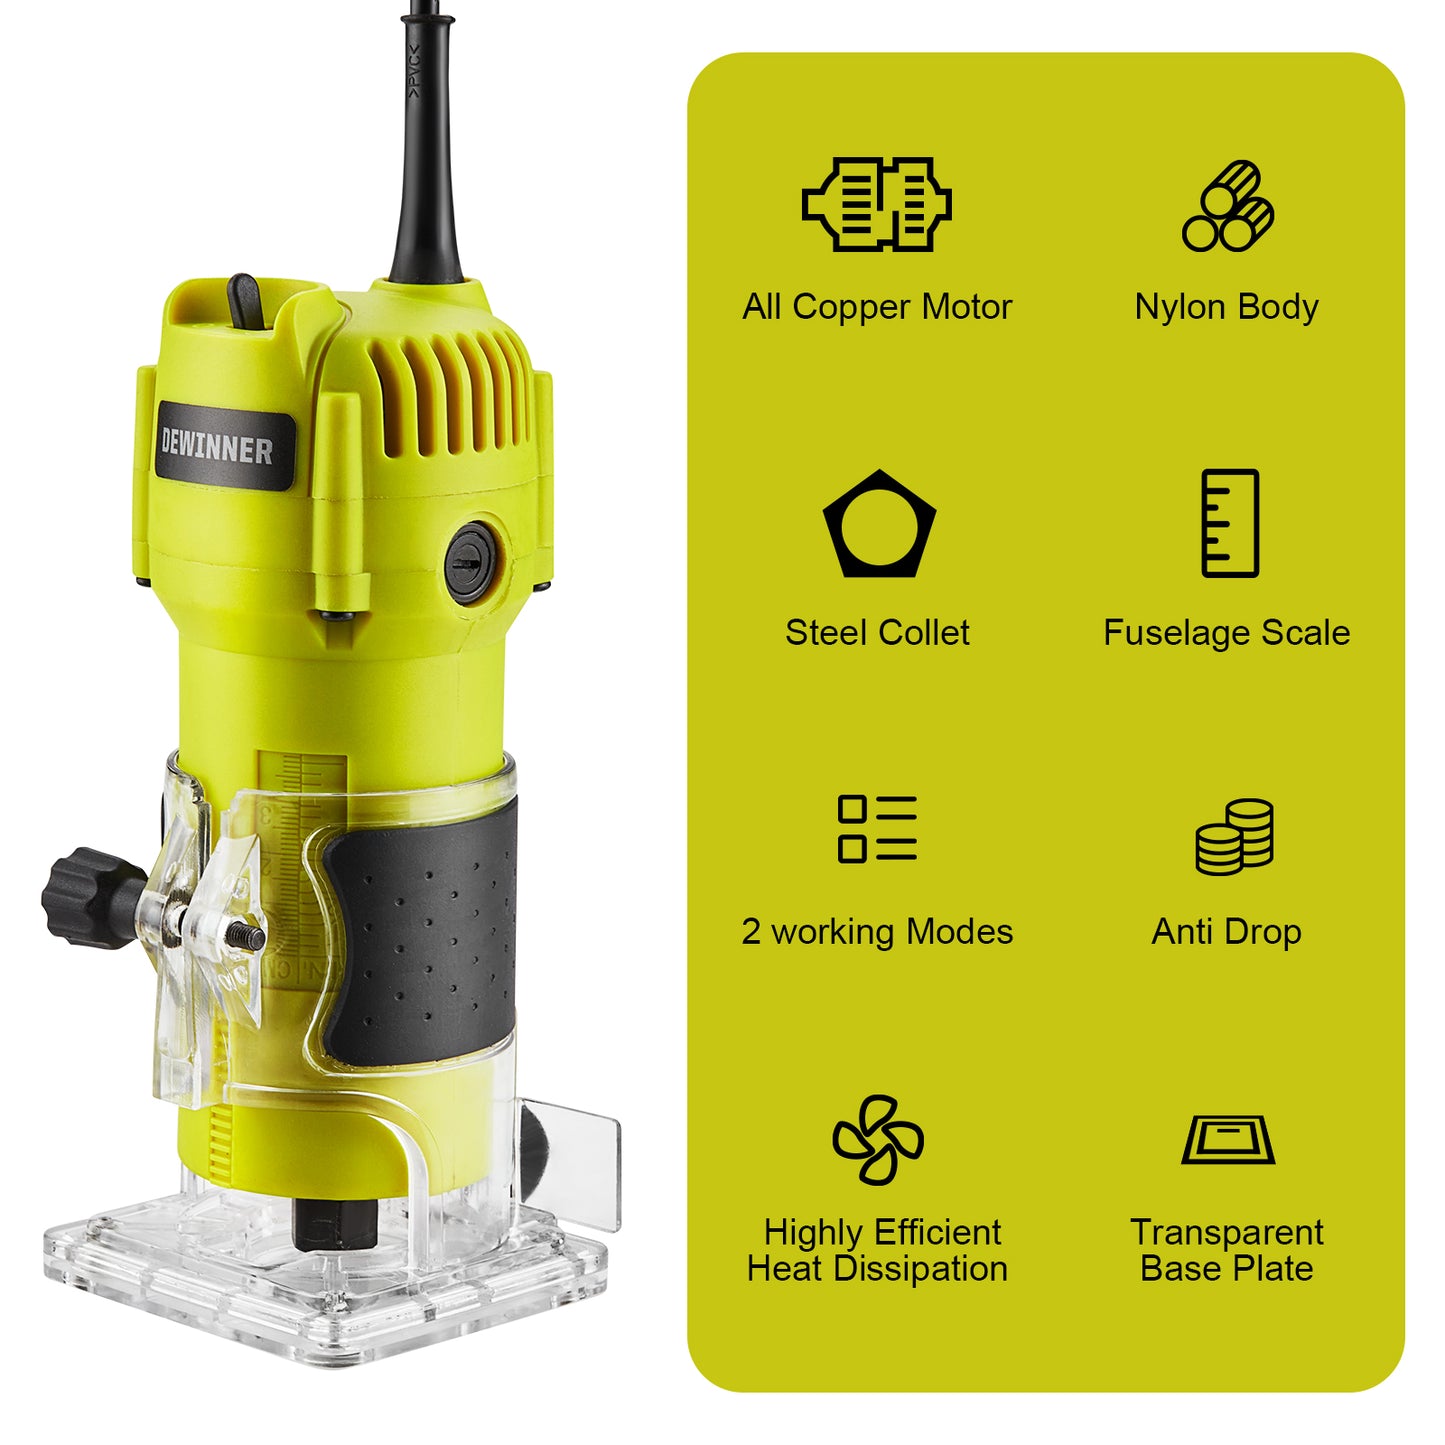 Electric Hand Palm Router, DEWINNER Trimmer Laminate Wood Working Joiners Tool, Compact Router with Trimmer Base, 3 Guide,2 Collets 1/4"(6.35mm) and 3/8"